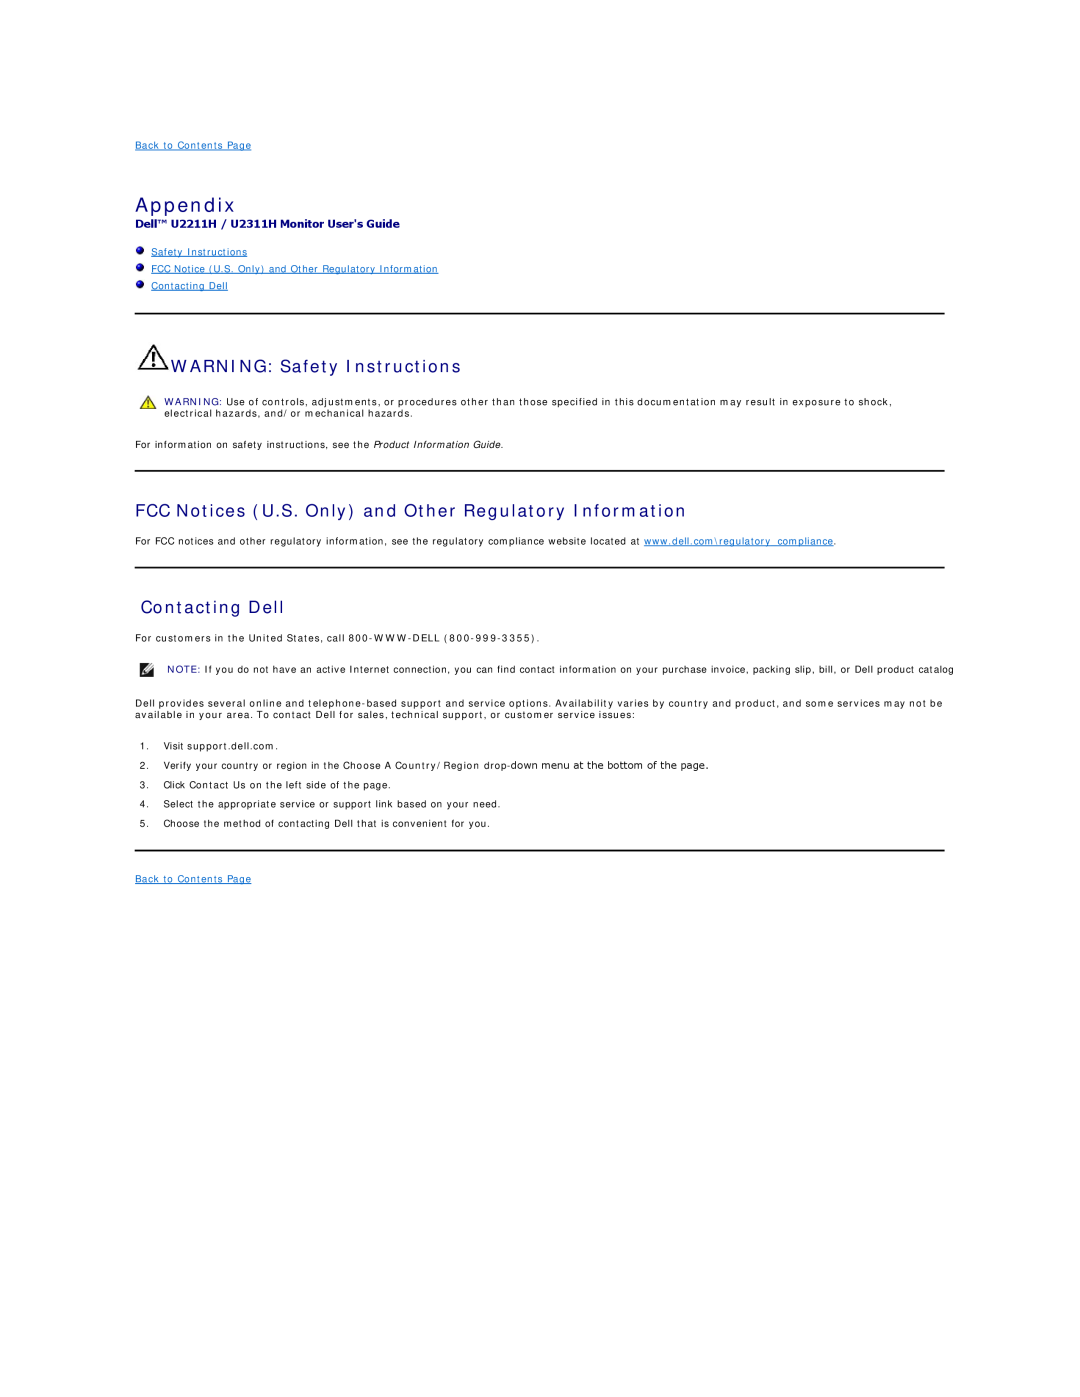 Dell U2211H Appendix, WARNING Safety Instructions, FCC Notices U.S. Only and Other Regulatory Information, Contacting Dell 